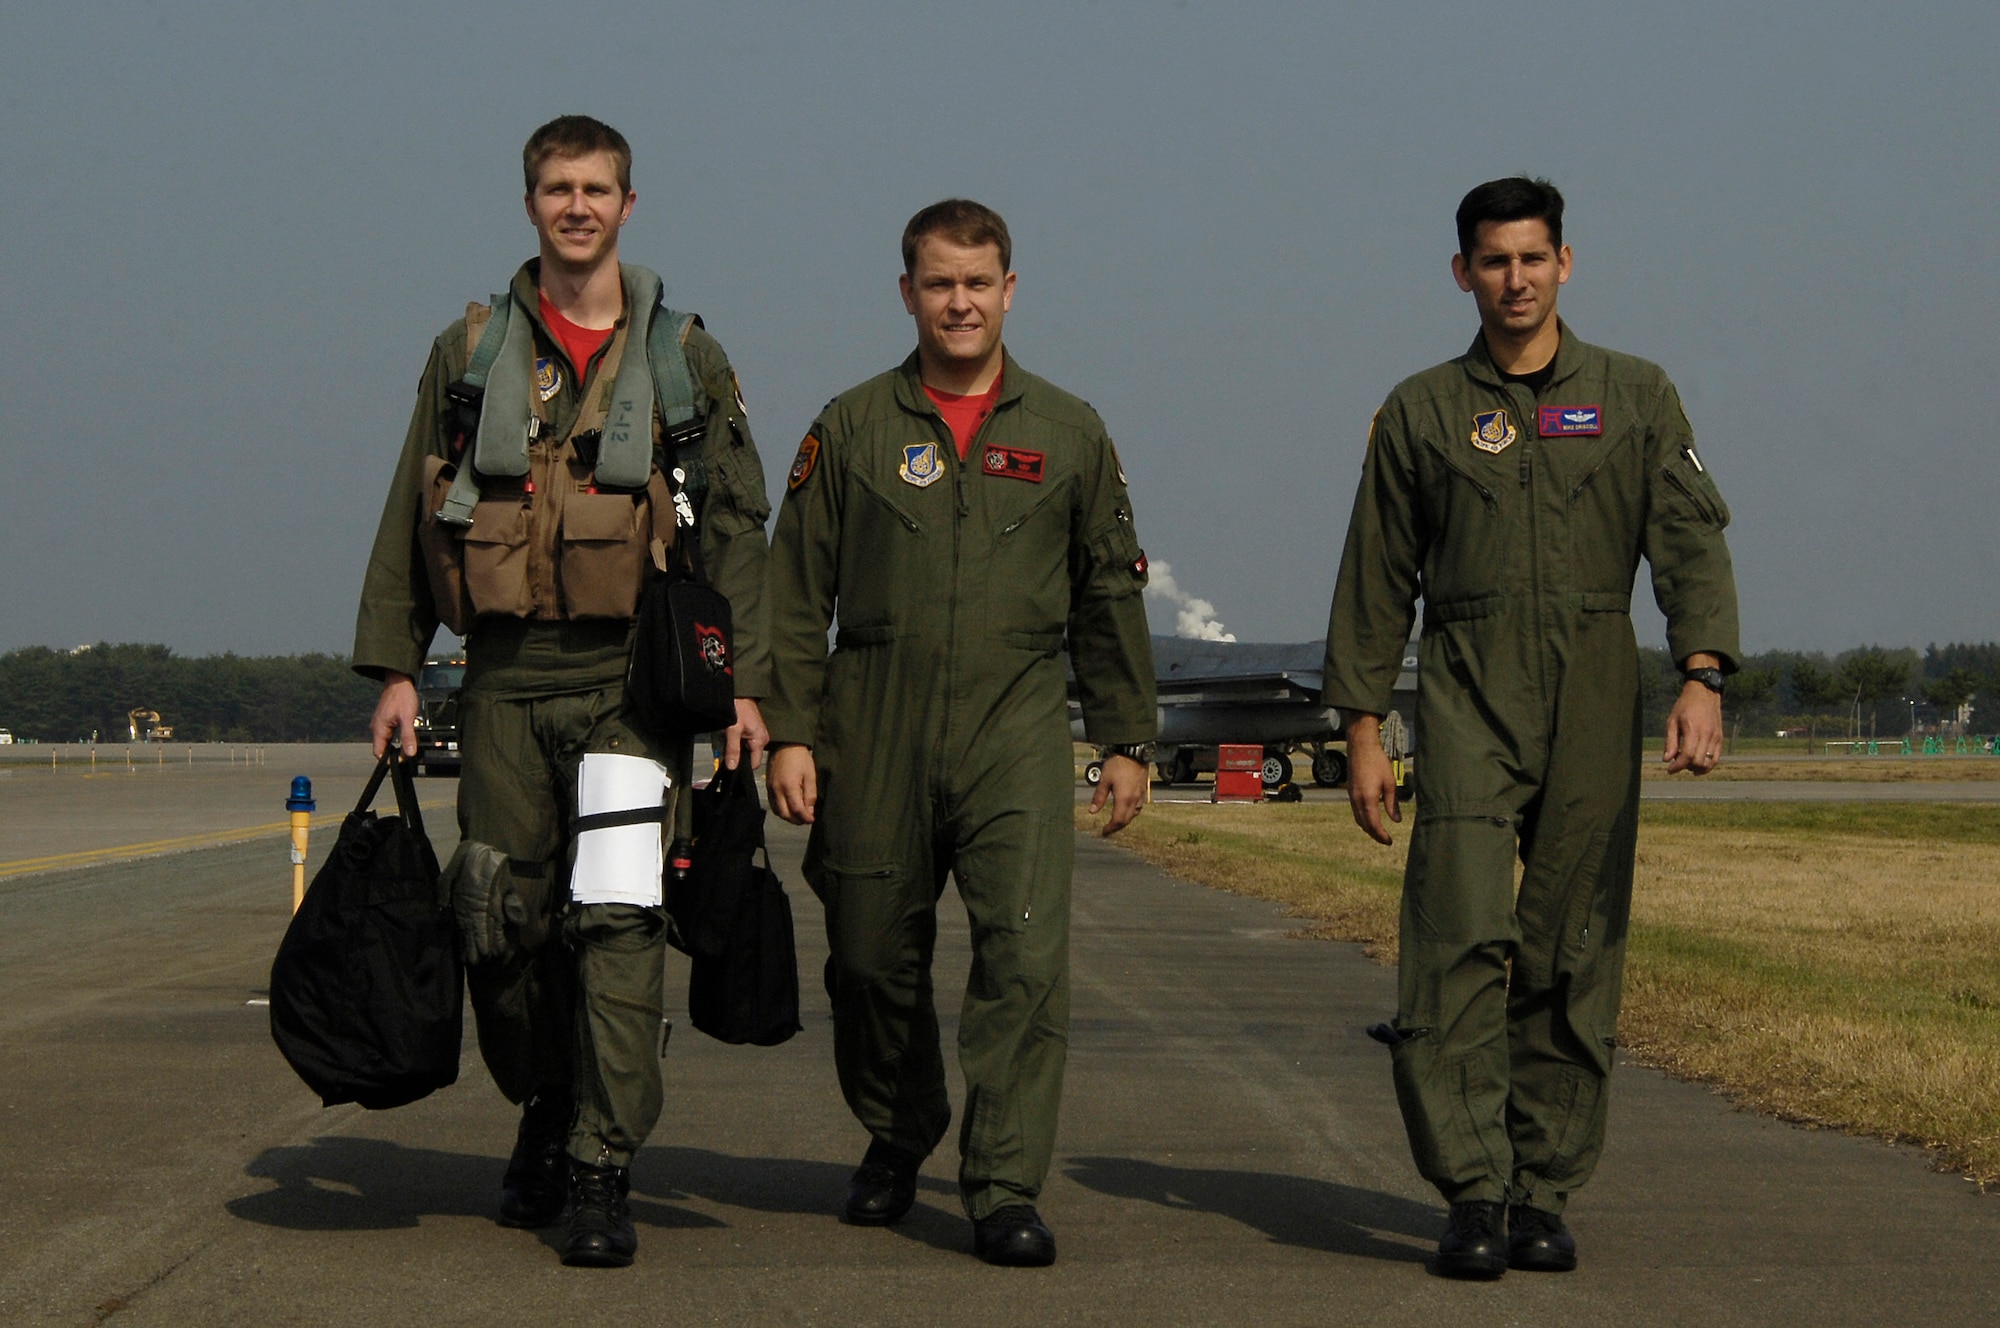 MISAWA AIR BASE, Japan -- Capt. Jeffrey Schneider, Capt. Eric Freienmuth, and Capt. Michael Driscoll, pilots from the 13th Fighter Squadron walk off the flight line Oct 16, 2008. They won the award for best fighter squadron and wing during a "virtual" air combat exercise flown from simulator cockpits around the globe. (U.S. Air Force photo by Staff Sgt Araceli Alarcon)